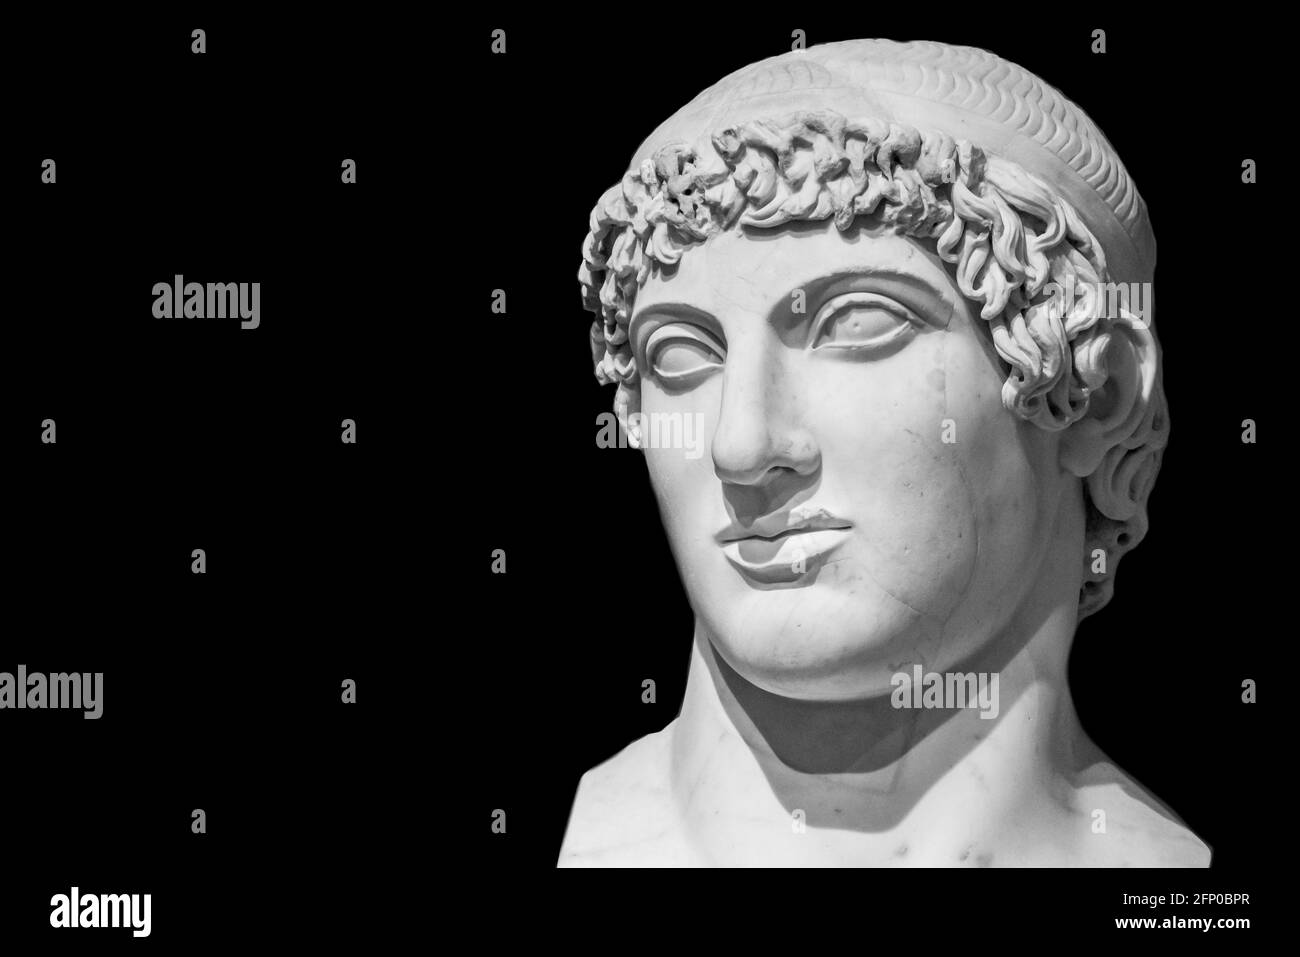 Black and white photo of ancient roman statue statue in close-up showing the handsome face of a young man Stock Photo